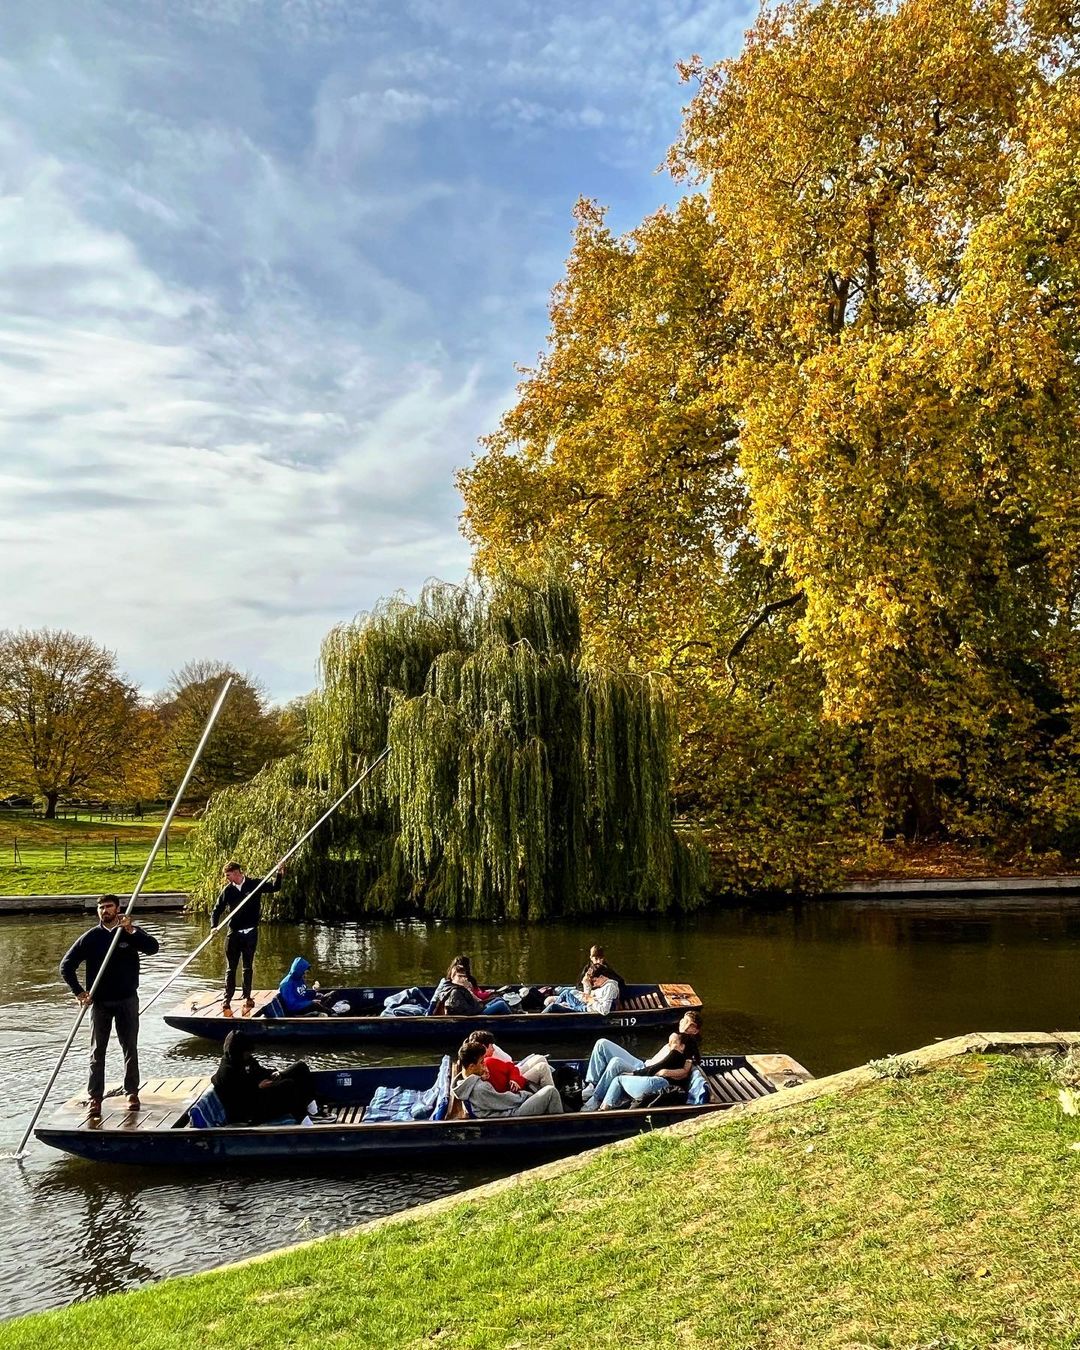 People boating on the River Cam in Cambridge, England.